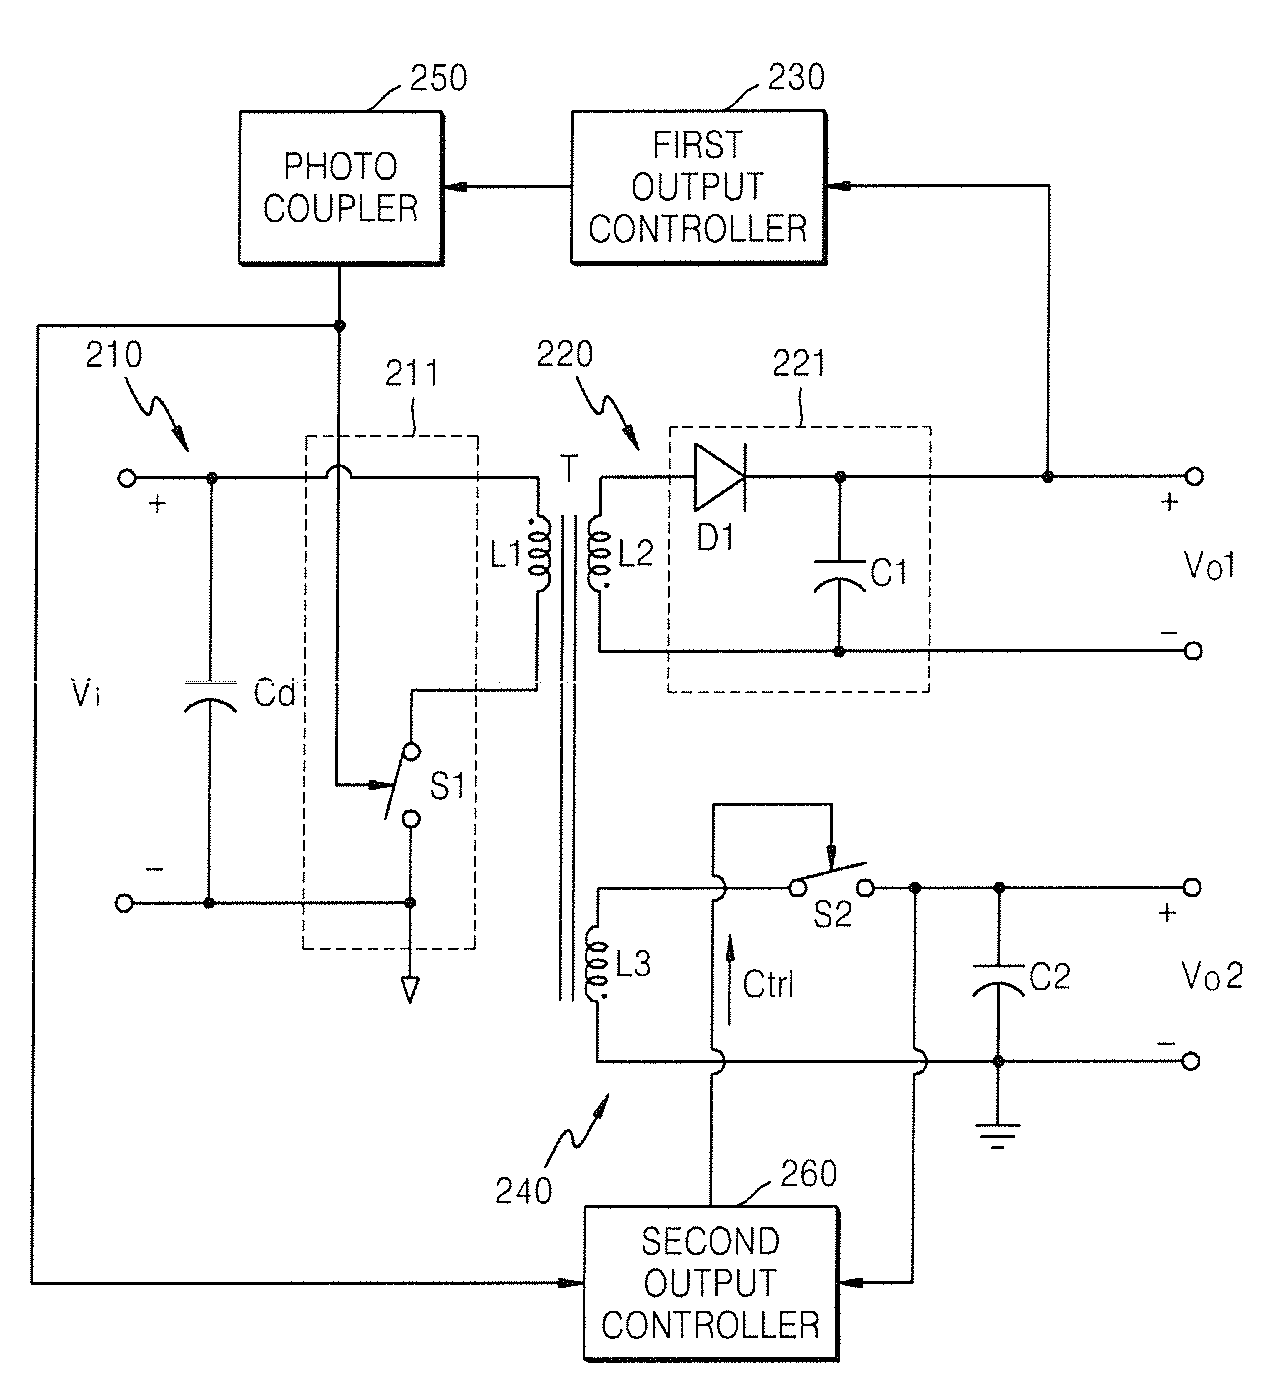 Power supply apparatus having multiple outputs